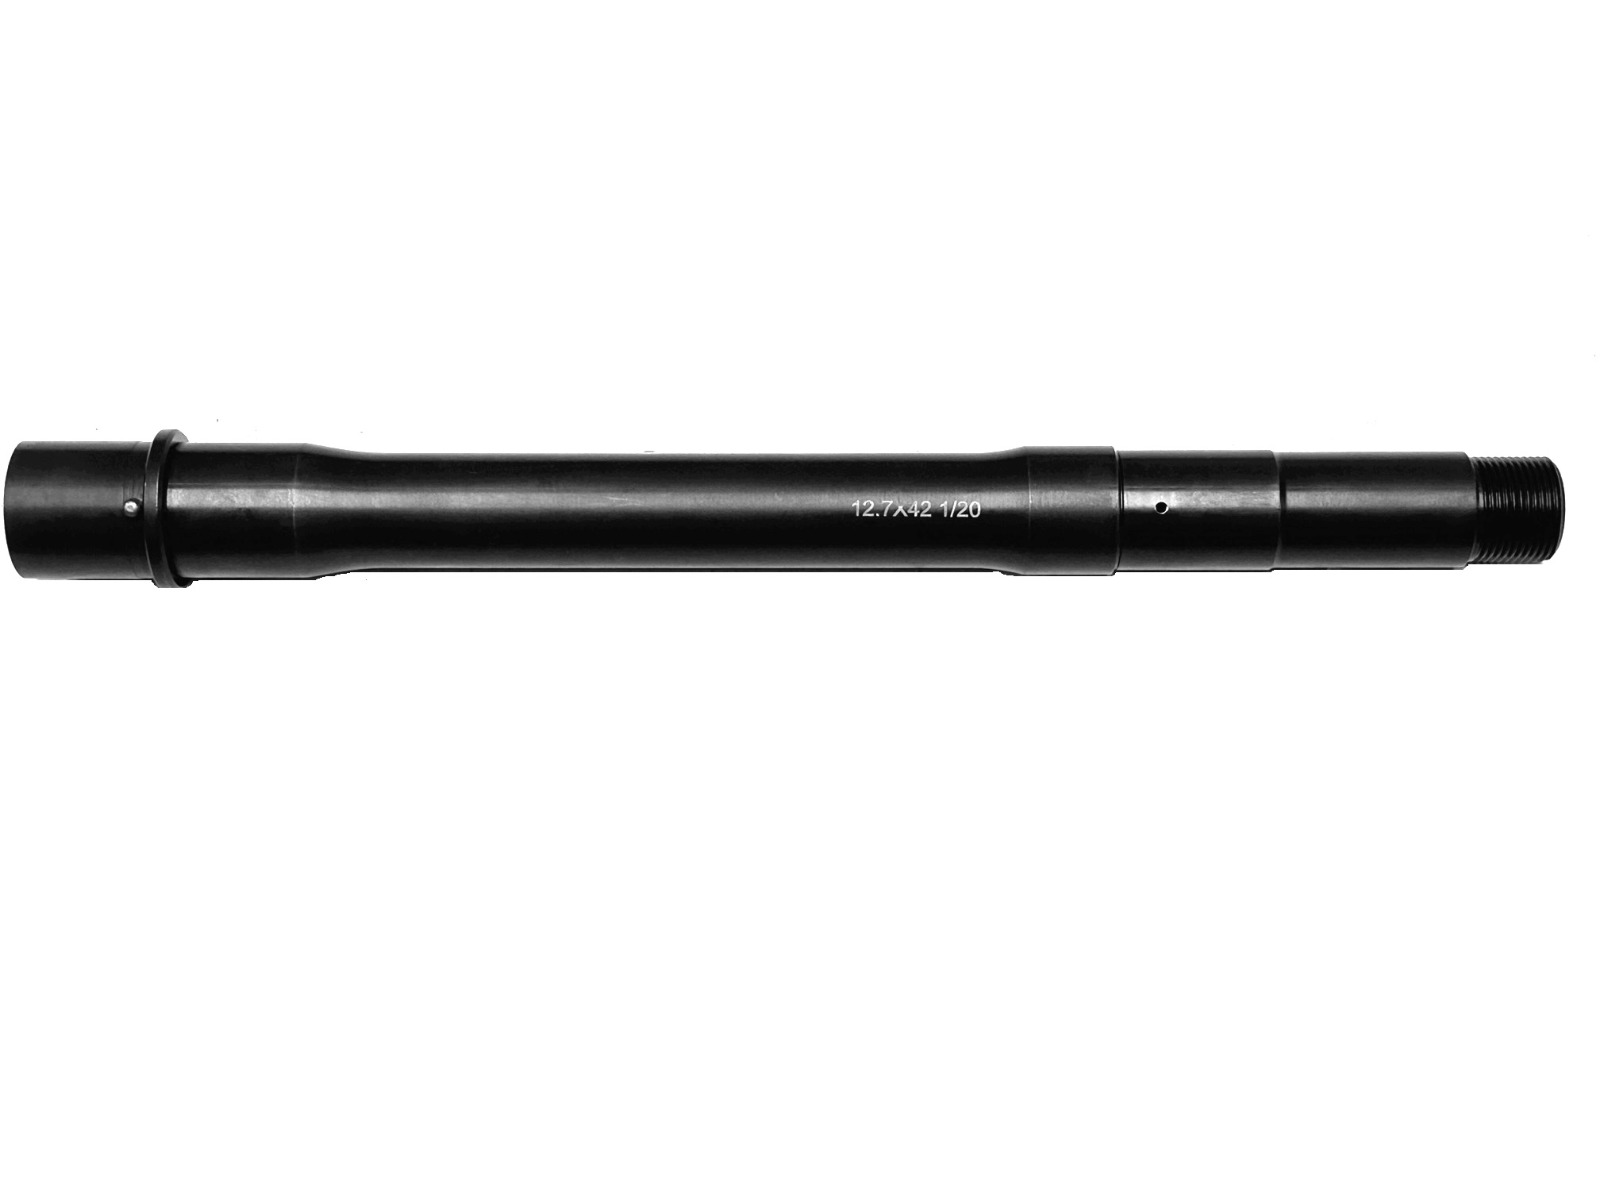 10.5 inch 50 Beowulf AR-15 Barrel | Pro2A Tactical 